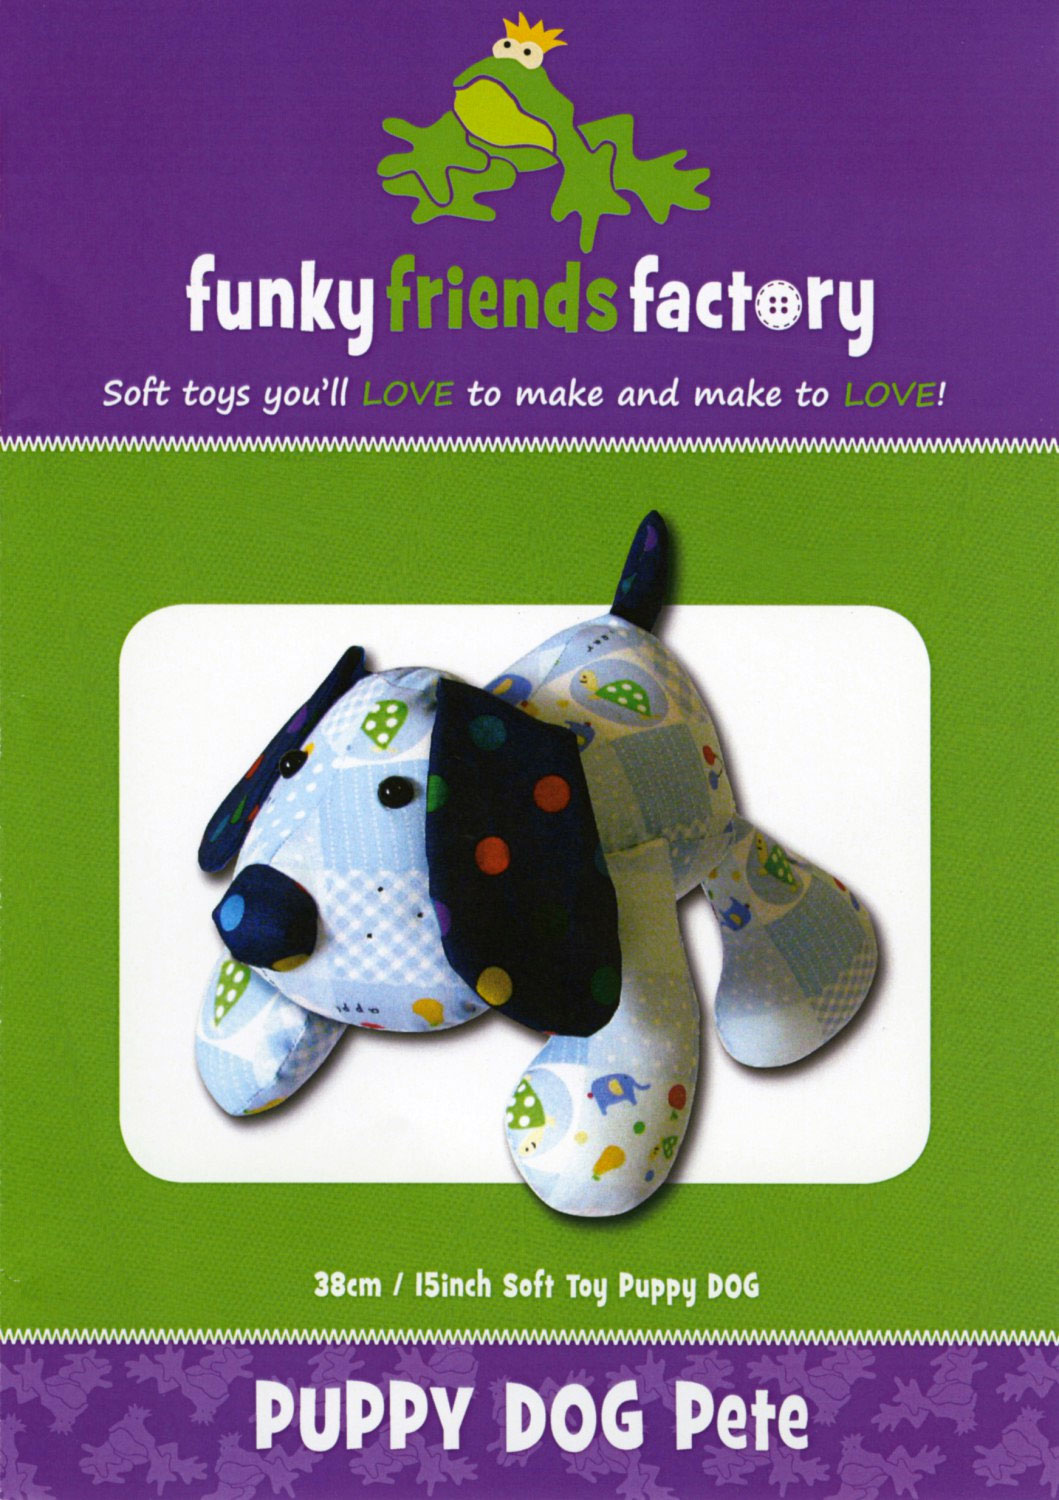 Puppy-Dog-Pete-sewing-pattern-Funky-Friends-Factory-front